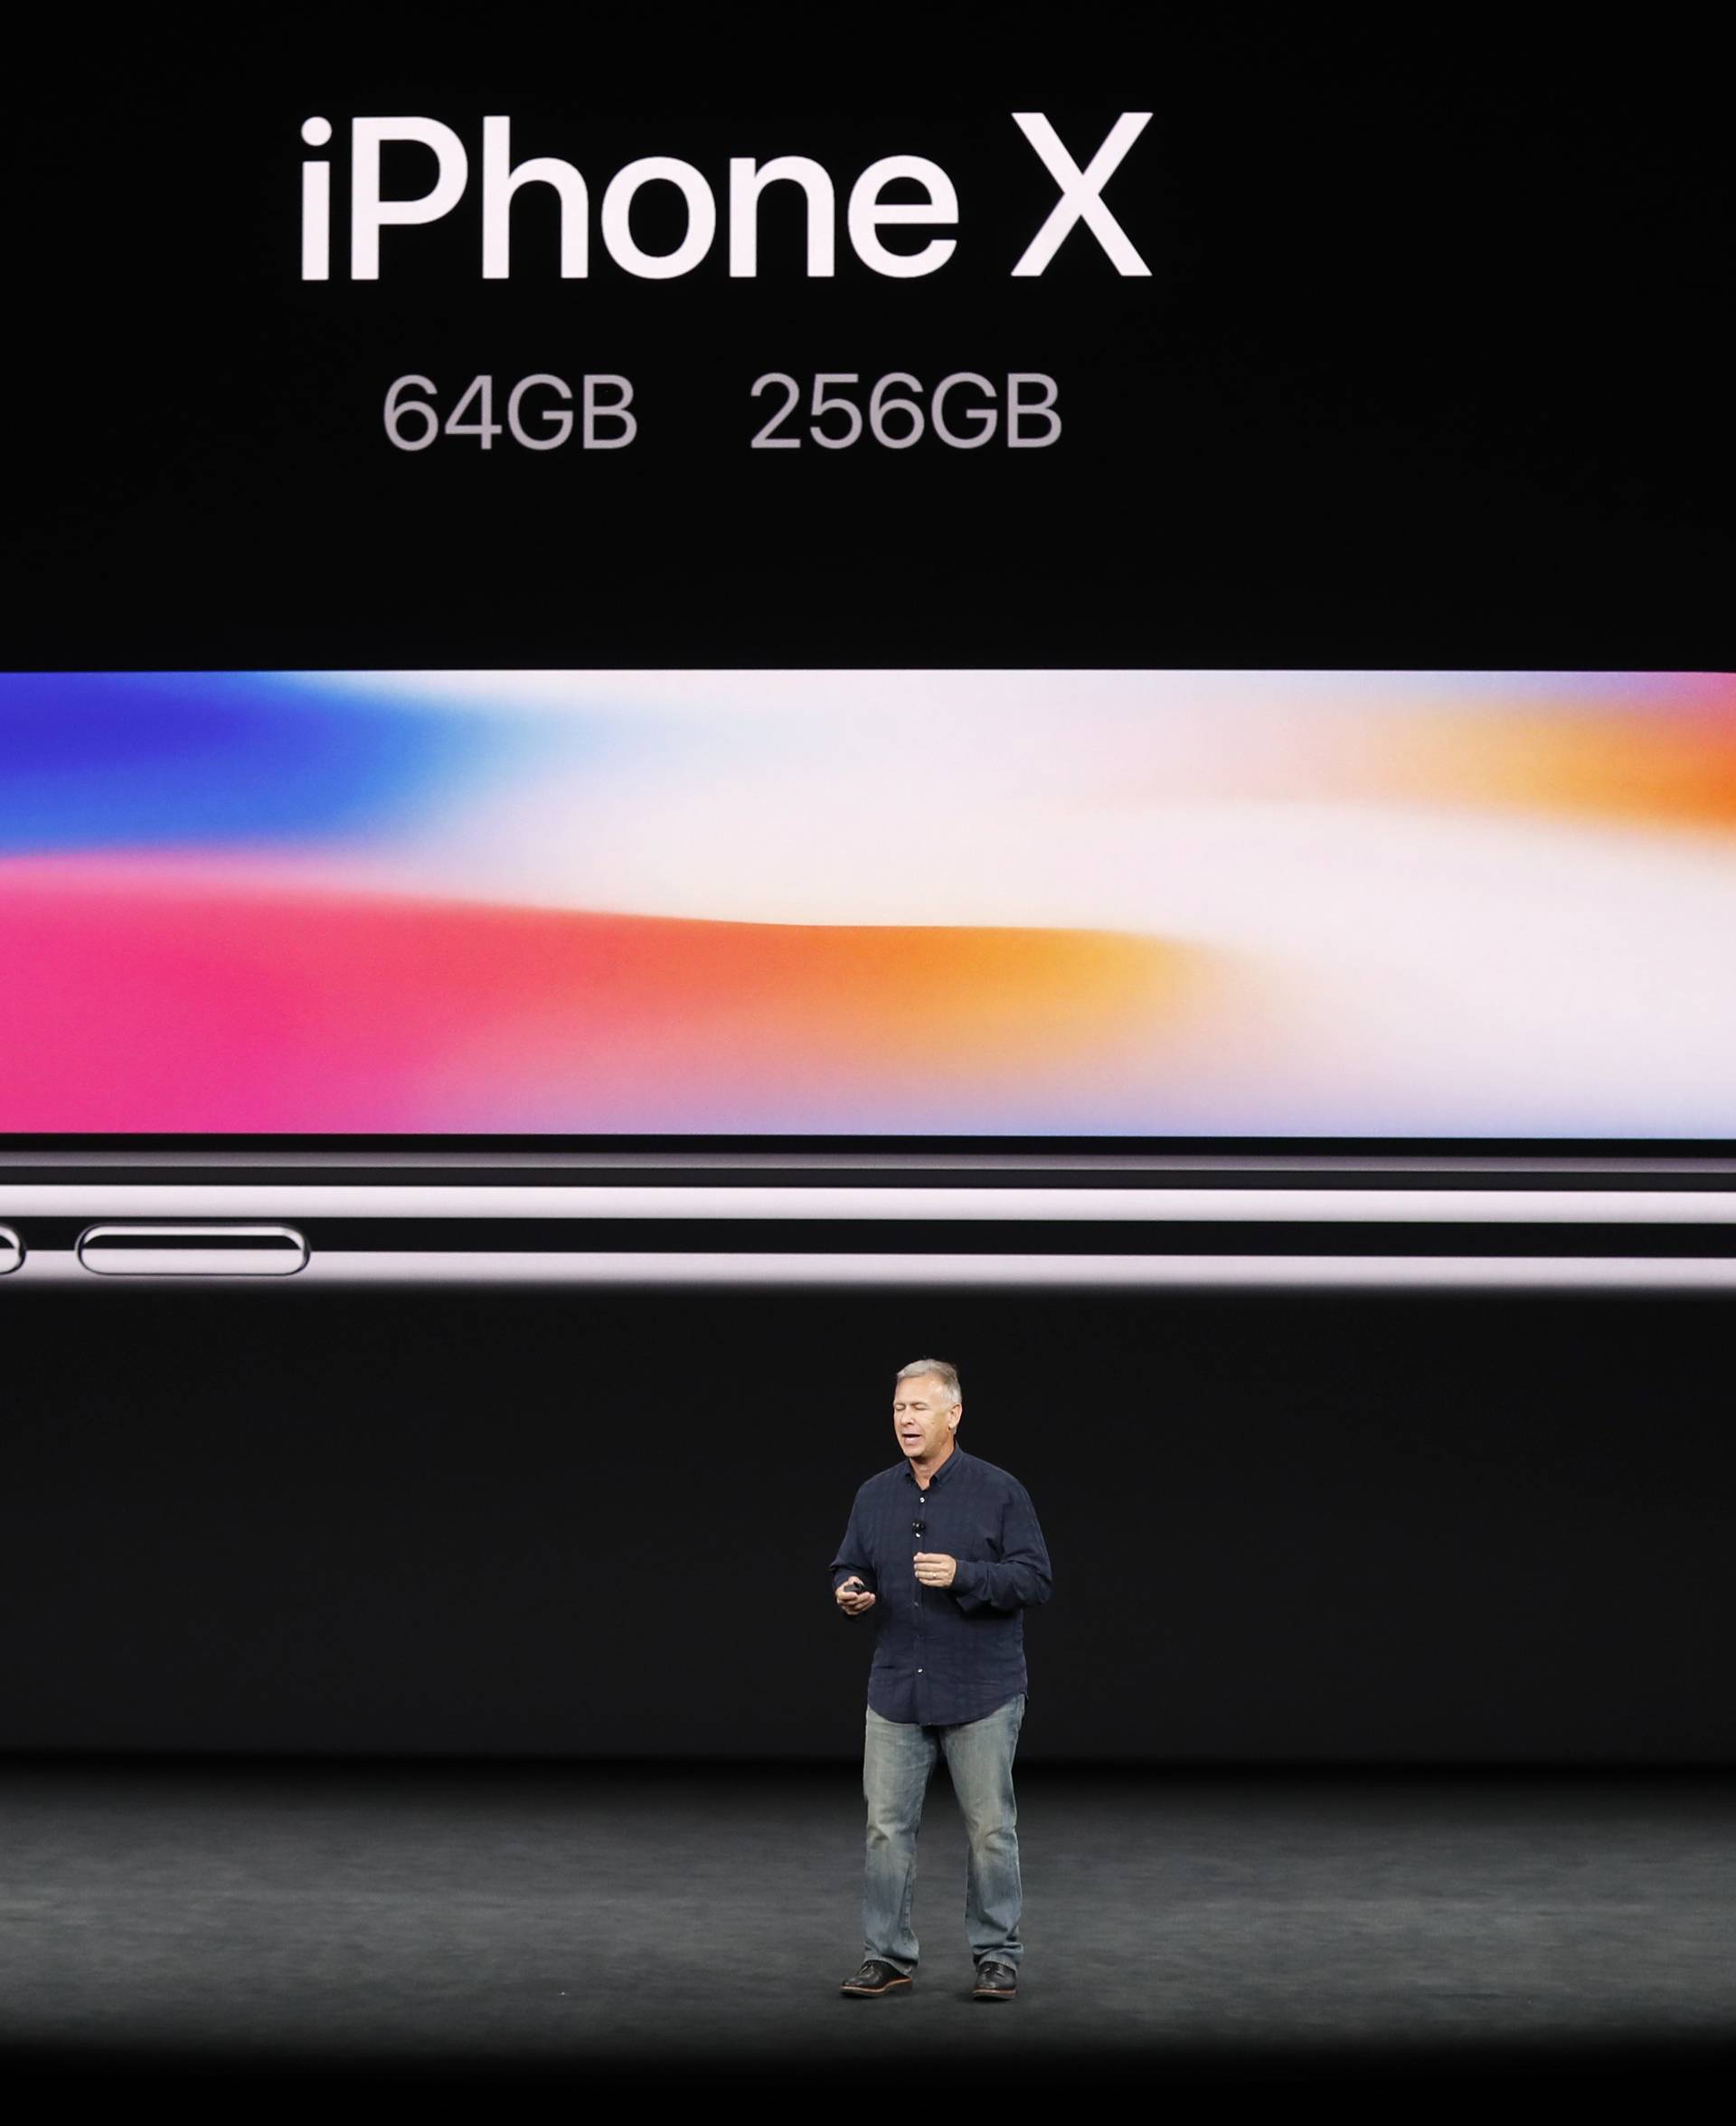 Apple's Schiller introduces iPhone X during a launch event in Cupertino